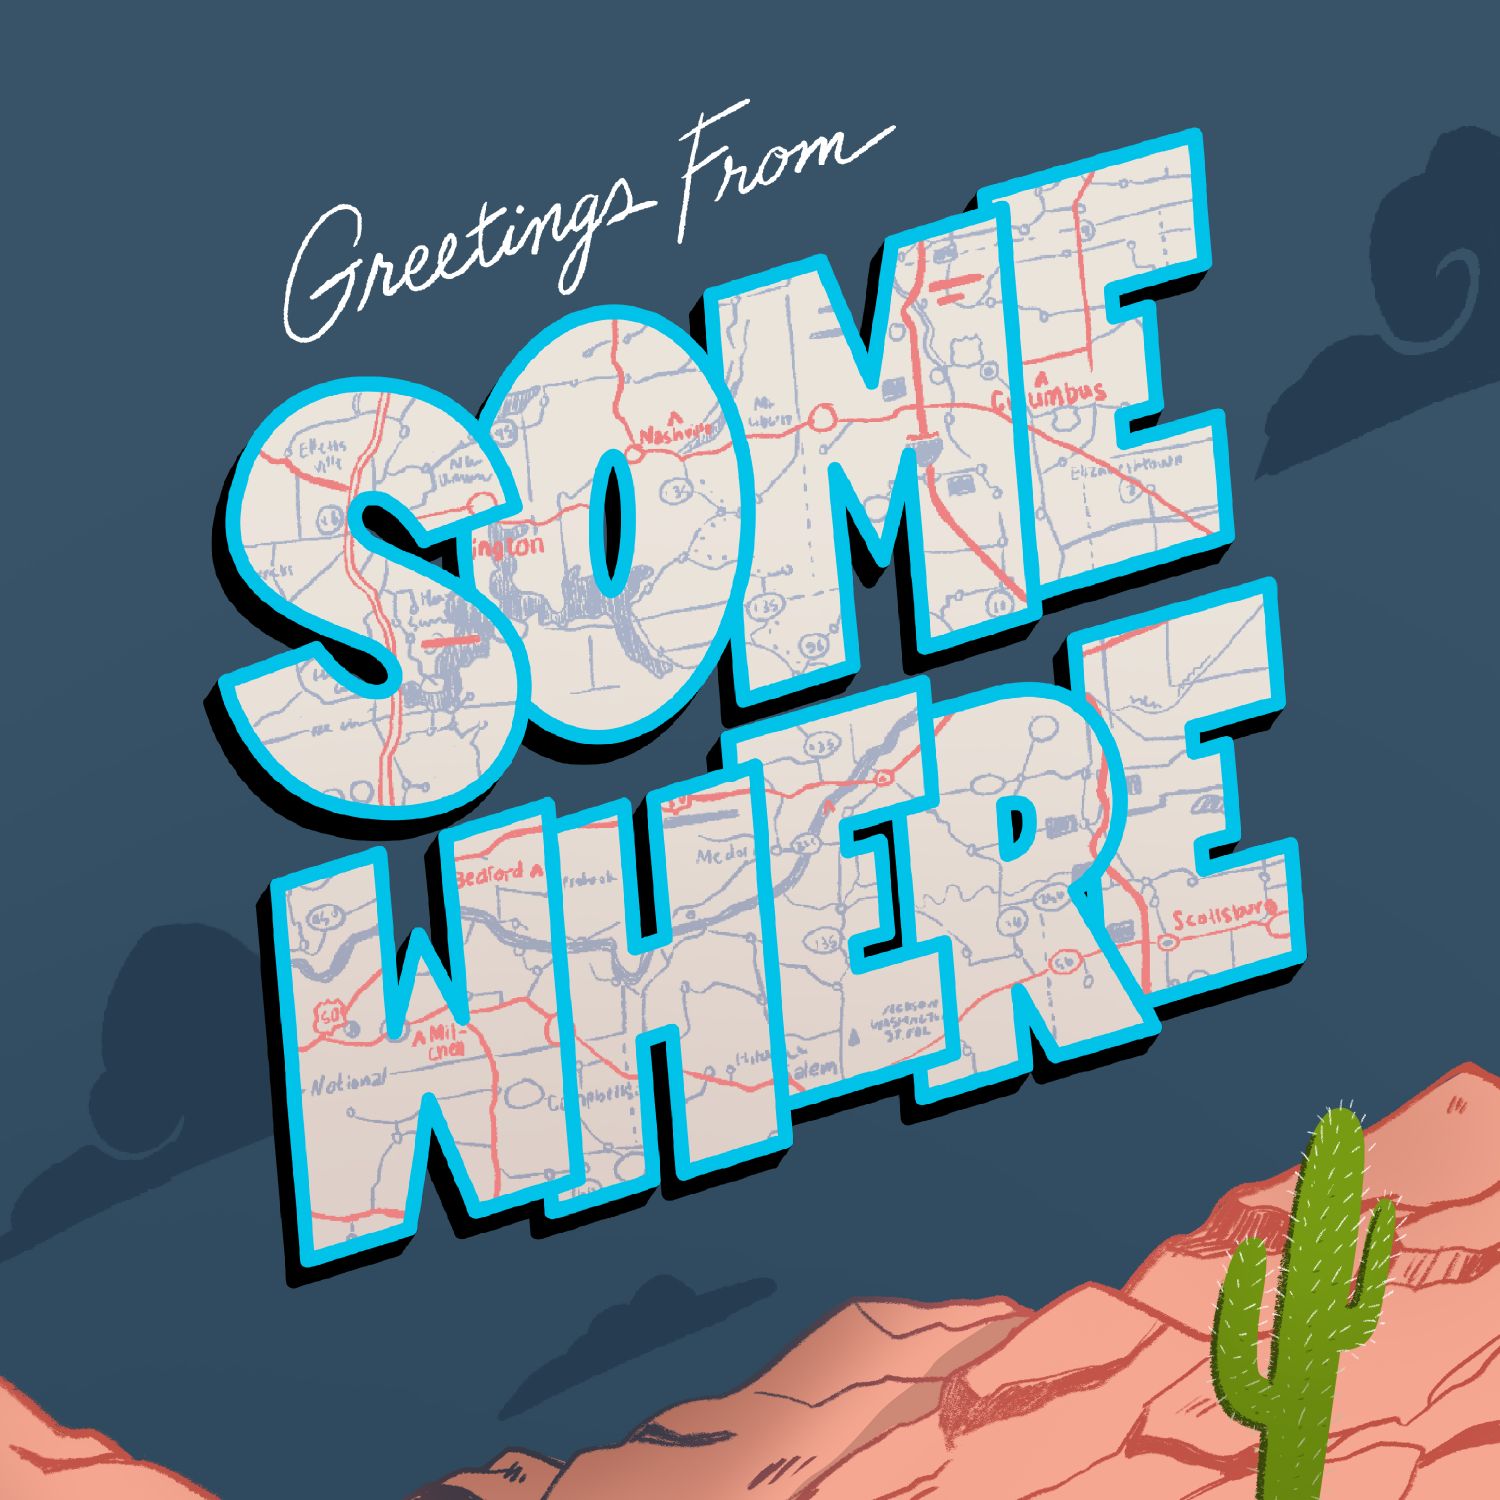 Greetings from Somewhere | A Travel Show podcast show image